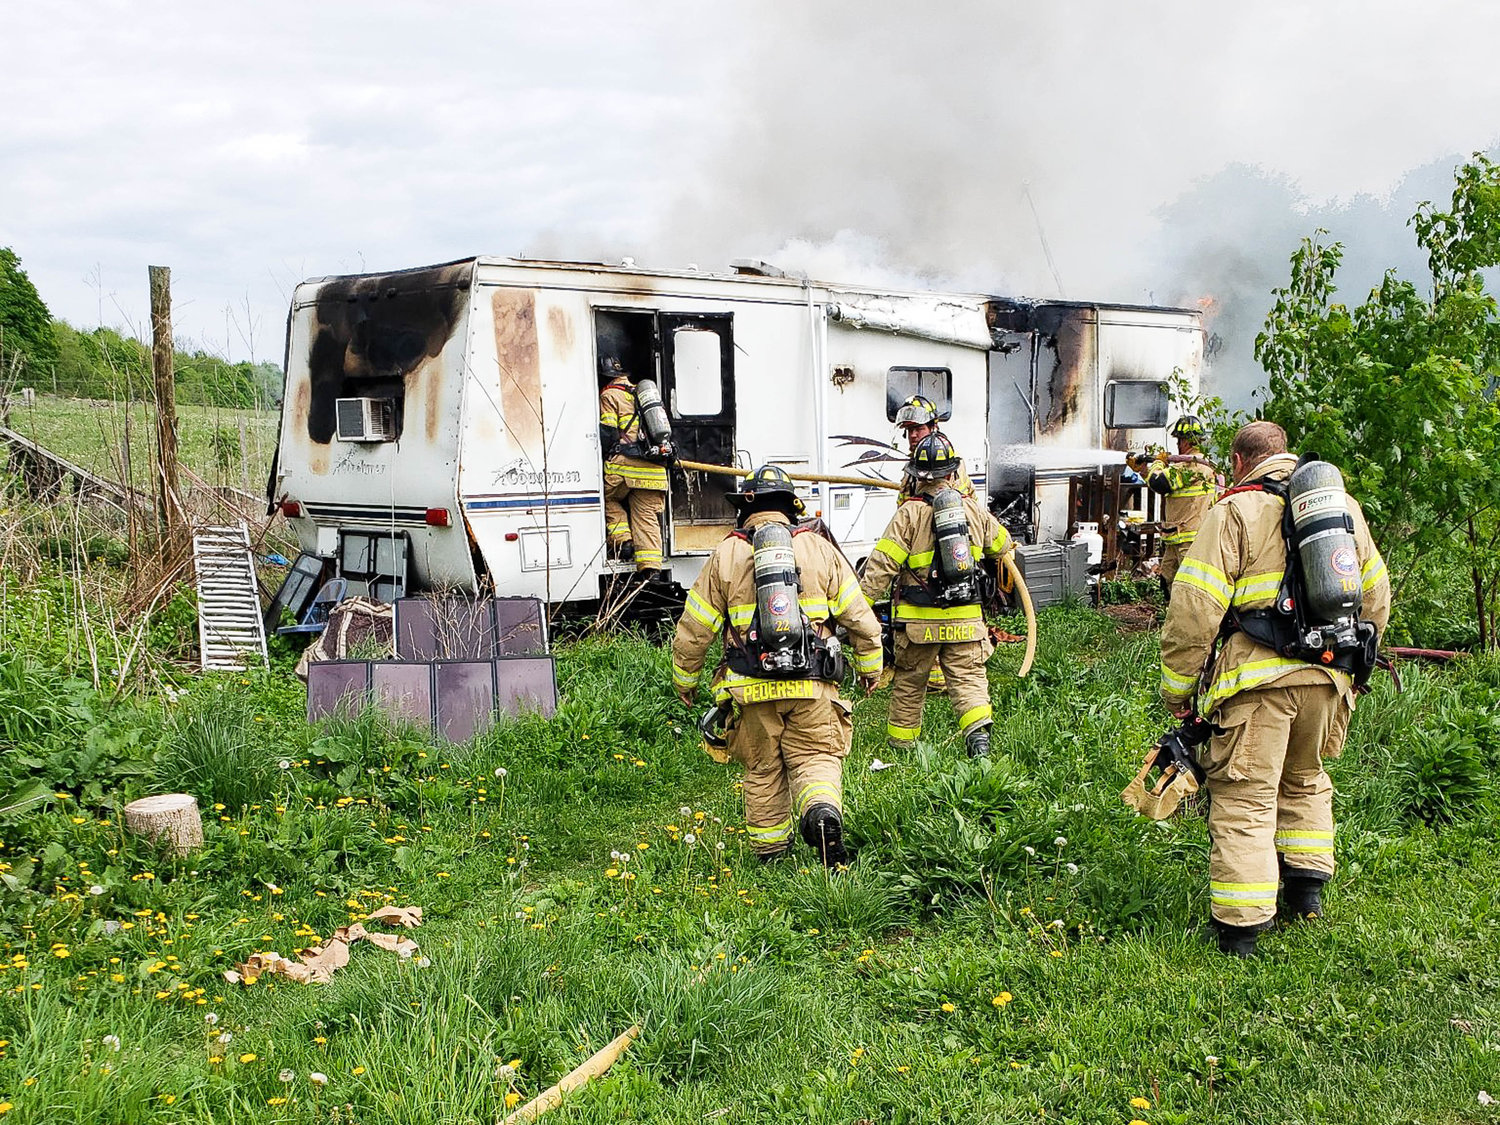 CAMPER FIRE — No one was injured when this camper caught fire on Brouillette Road in the Town of Augusta at about 9:53 a.m. Sunday, according to the Oriskany Falls Fire Department. Volunteers from Oriskany Falls and Vernon Center responded and doused the fire in about 10 minutes, officials said.